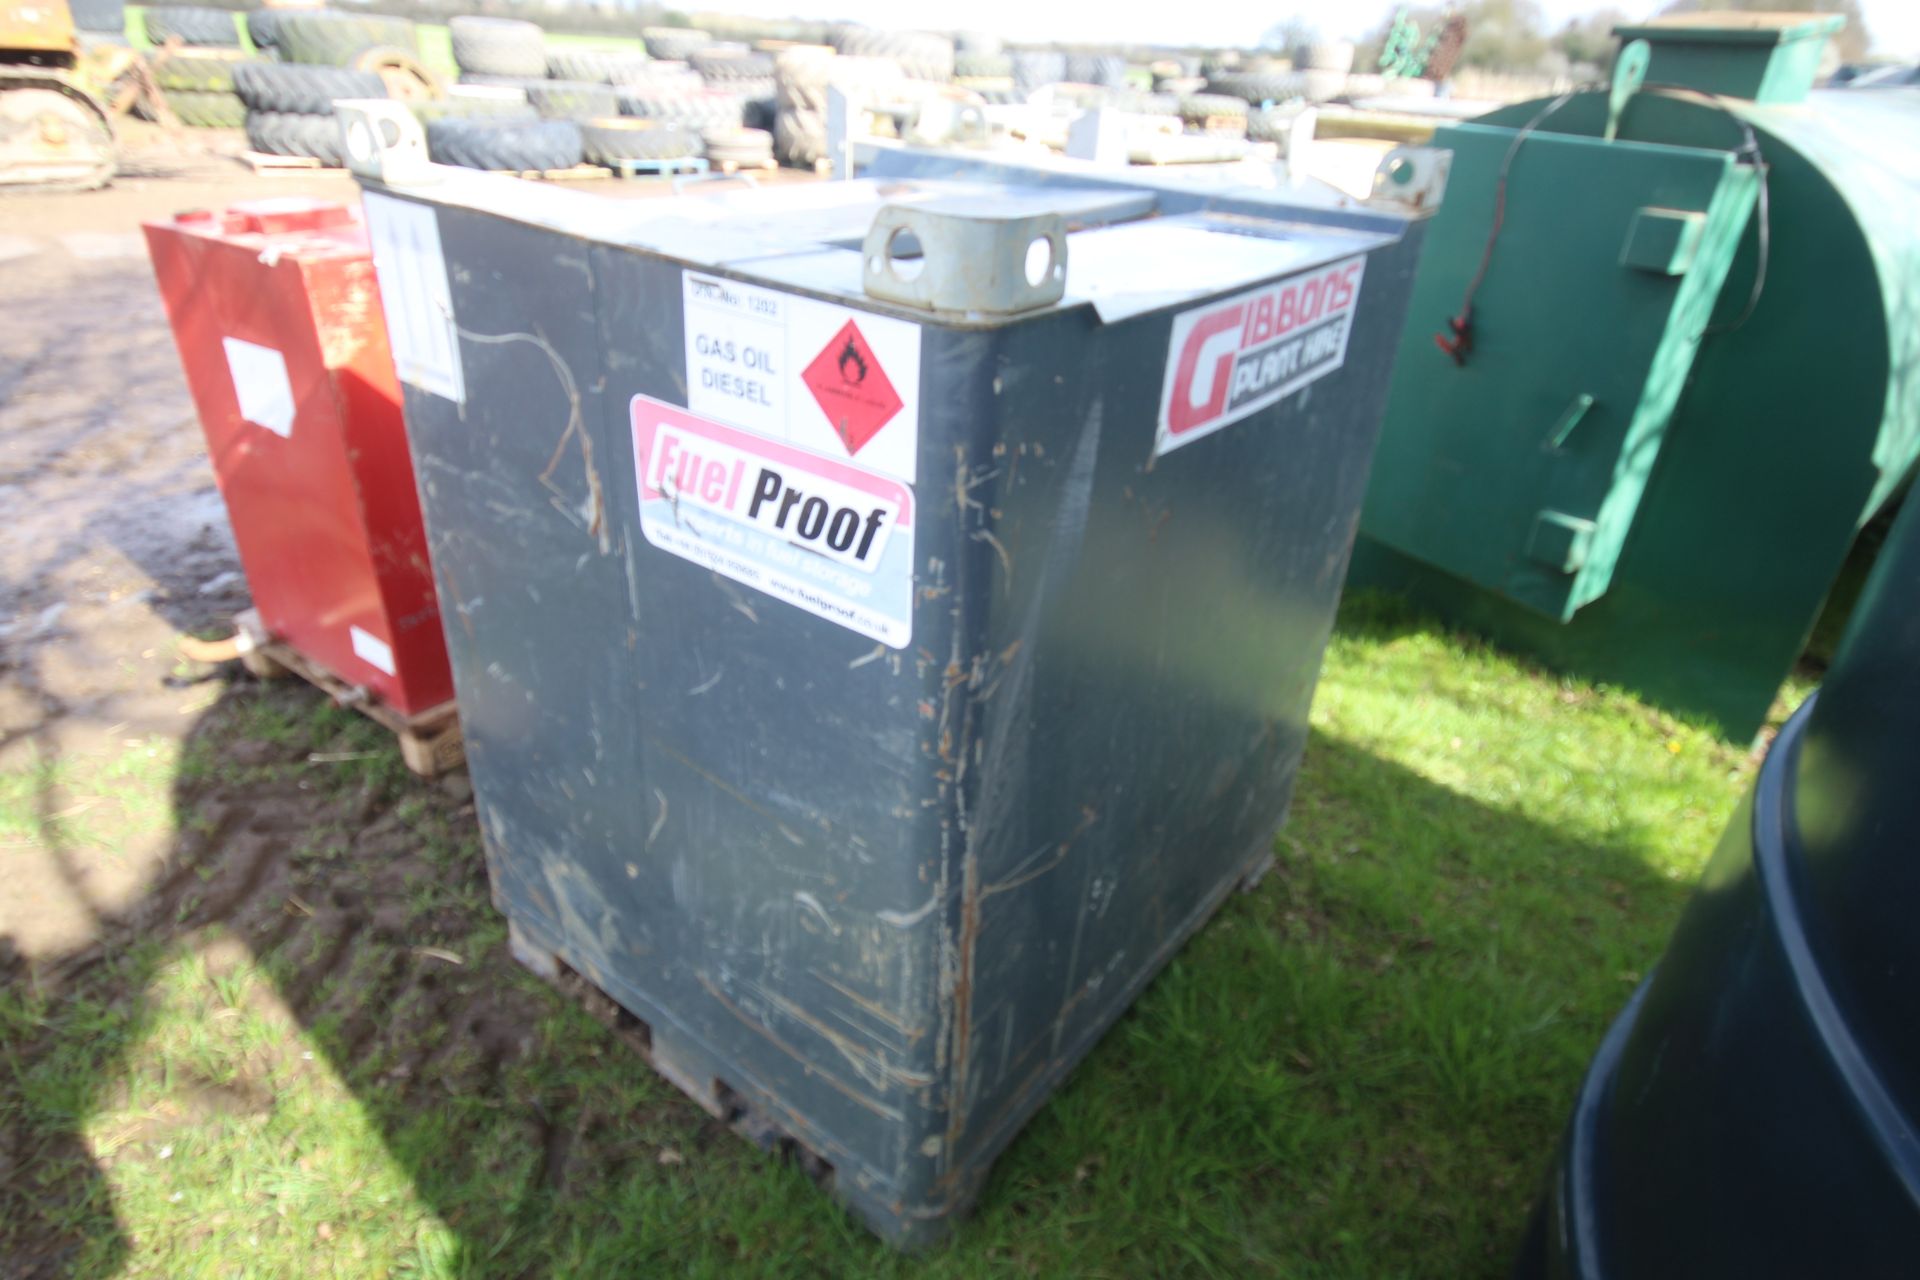 Fuel Proof 900L bunded fuel cube. 2018. With manual pump. For sale on behalf of the Directors, - Image 3 of 6